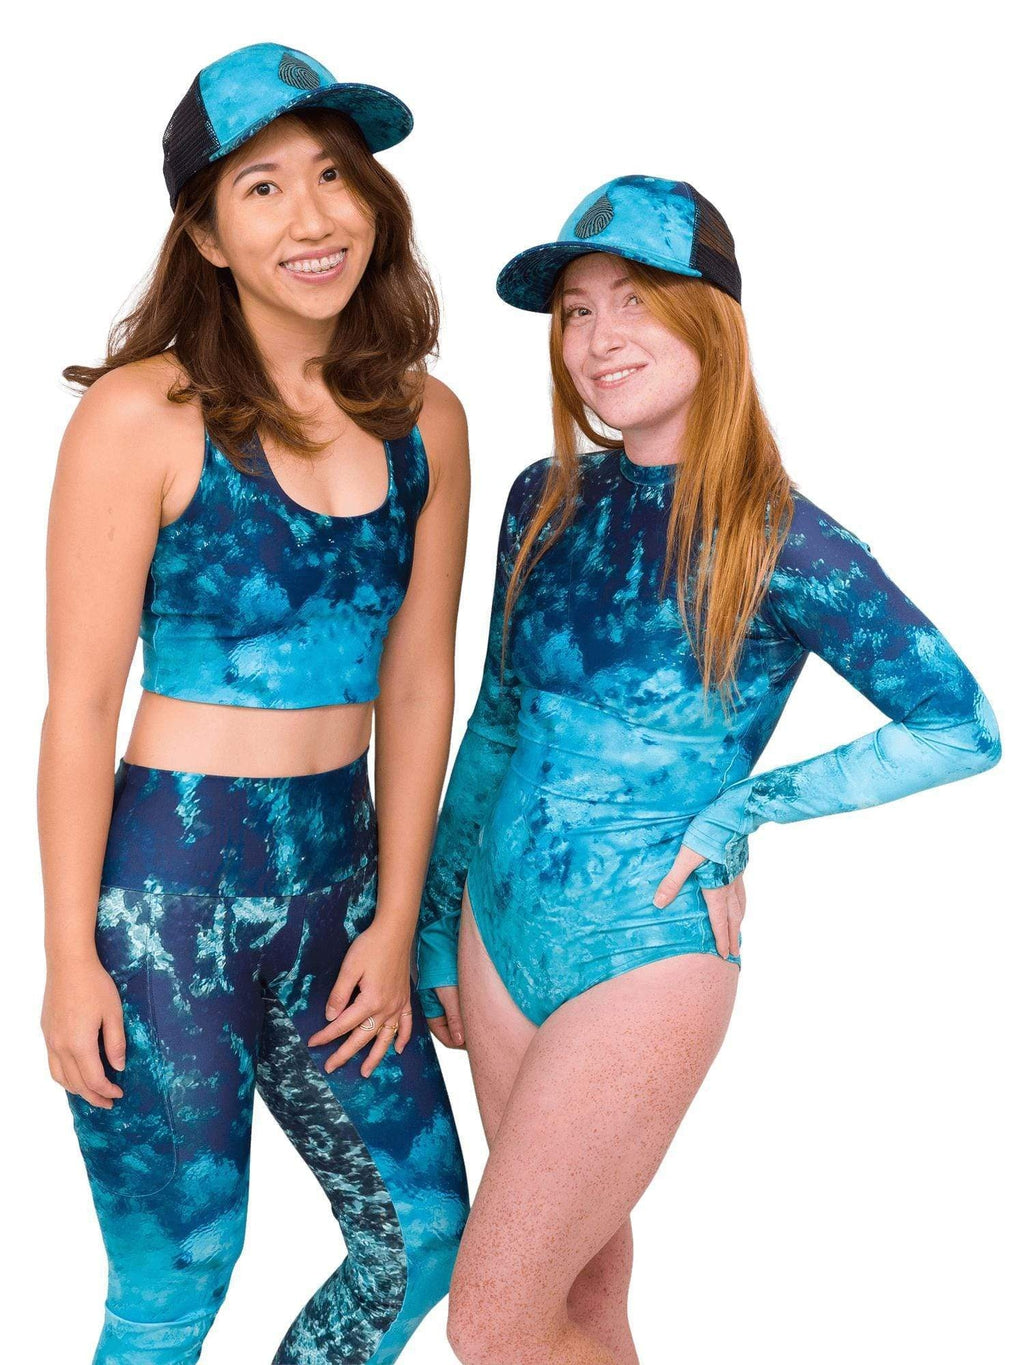 Model: Laura is a hurricane researcher and avid scuba diver (left). Meggan is working on a masters degree in marine science and has worked as a coral scientist (right).